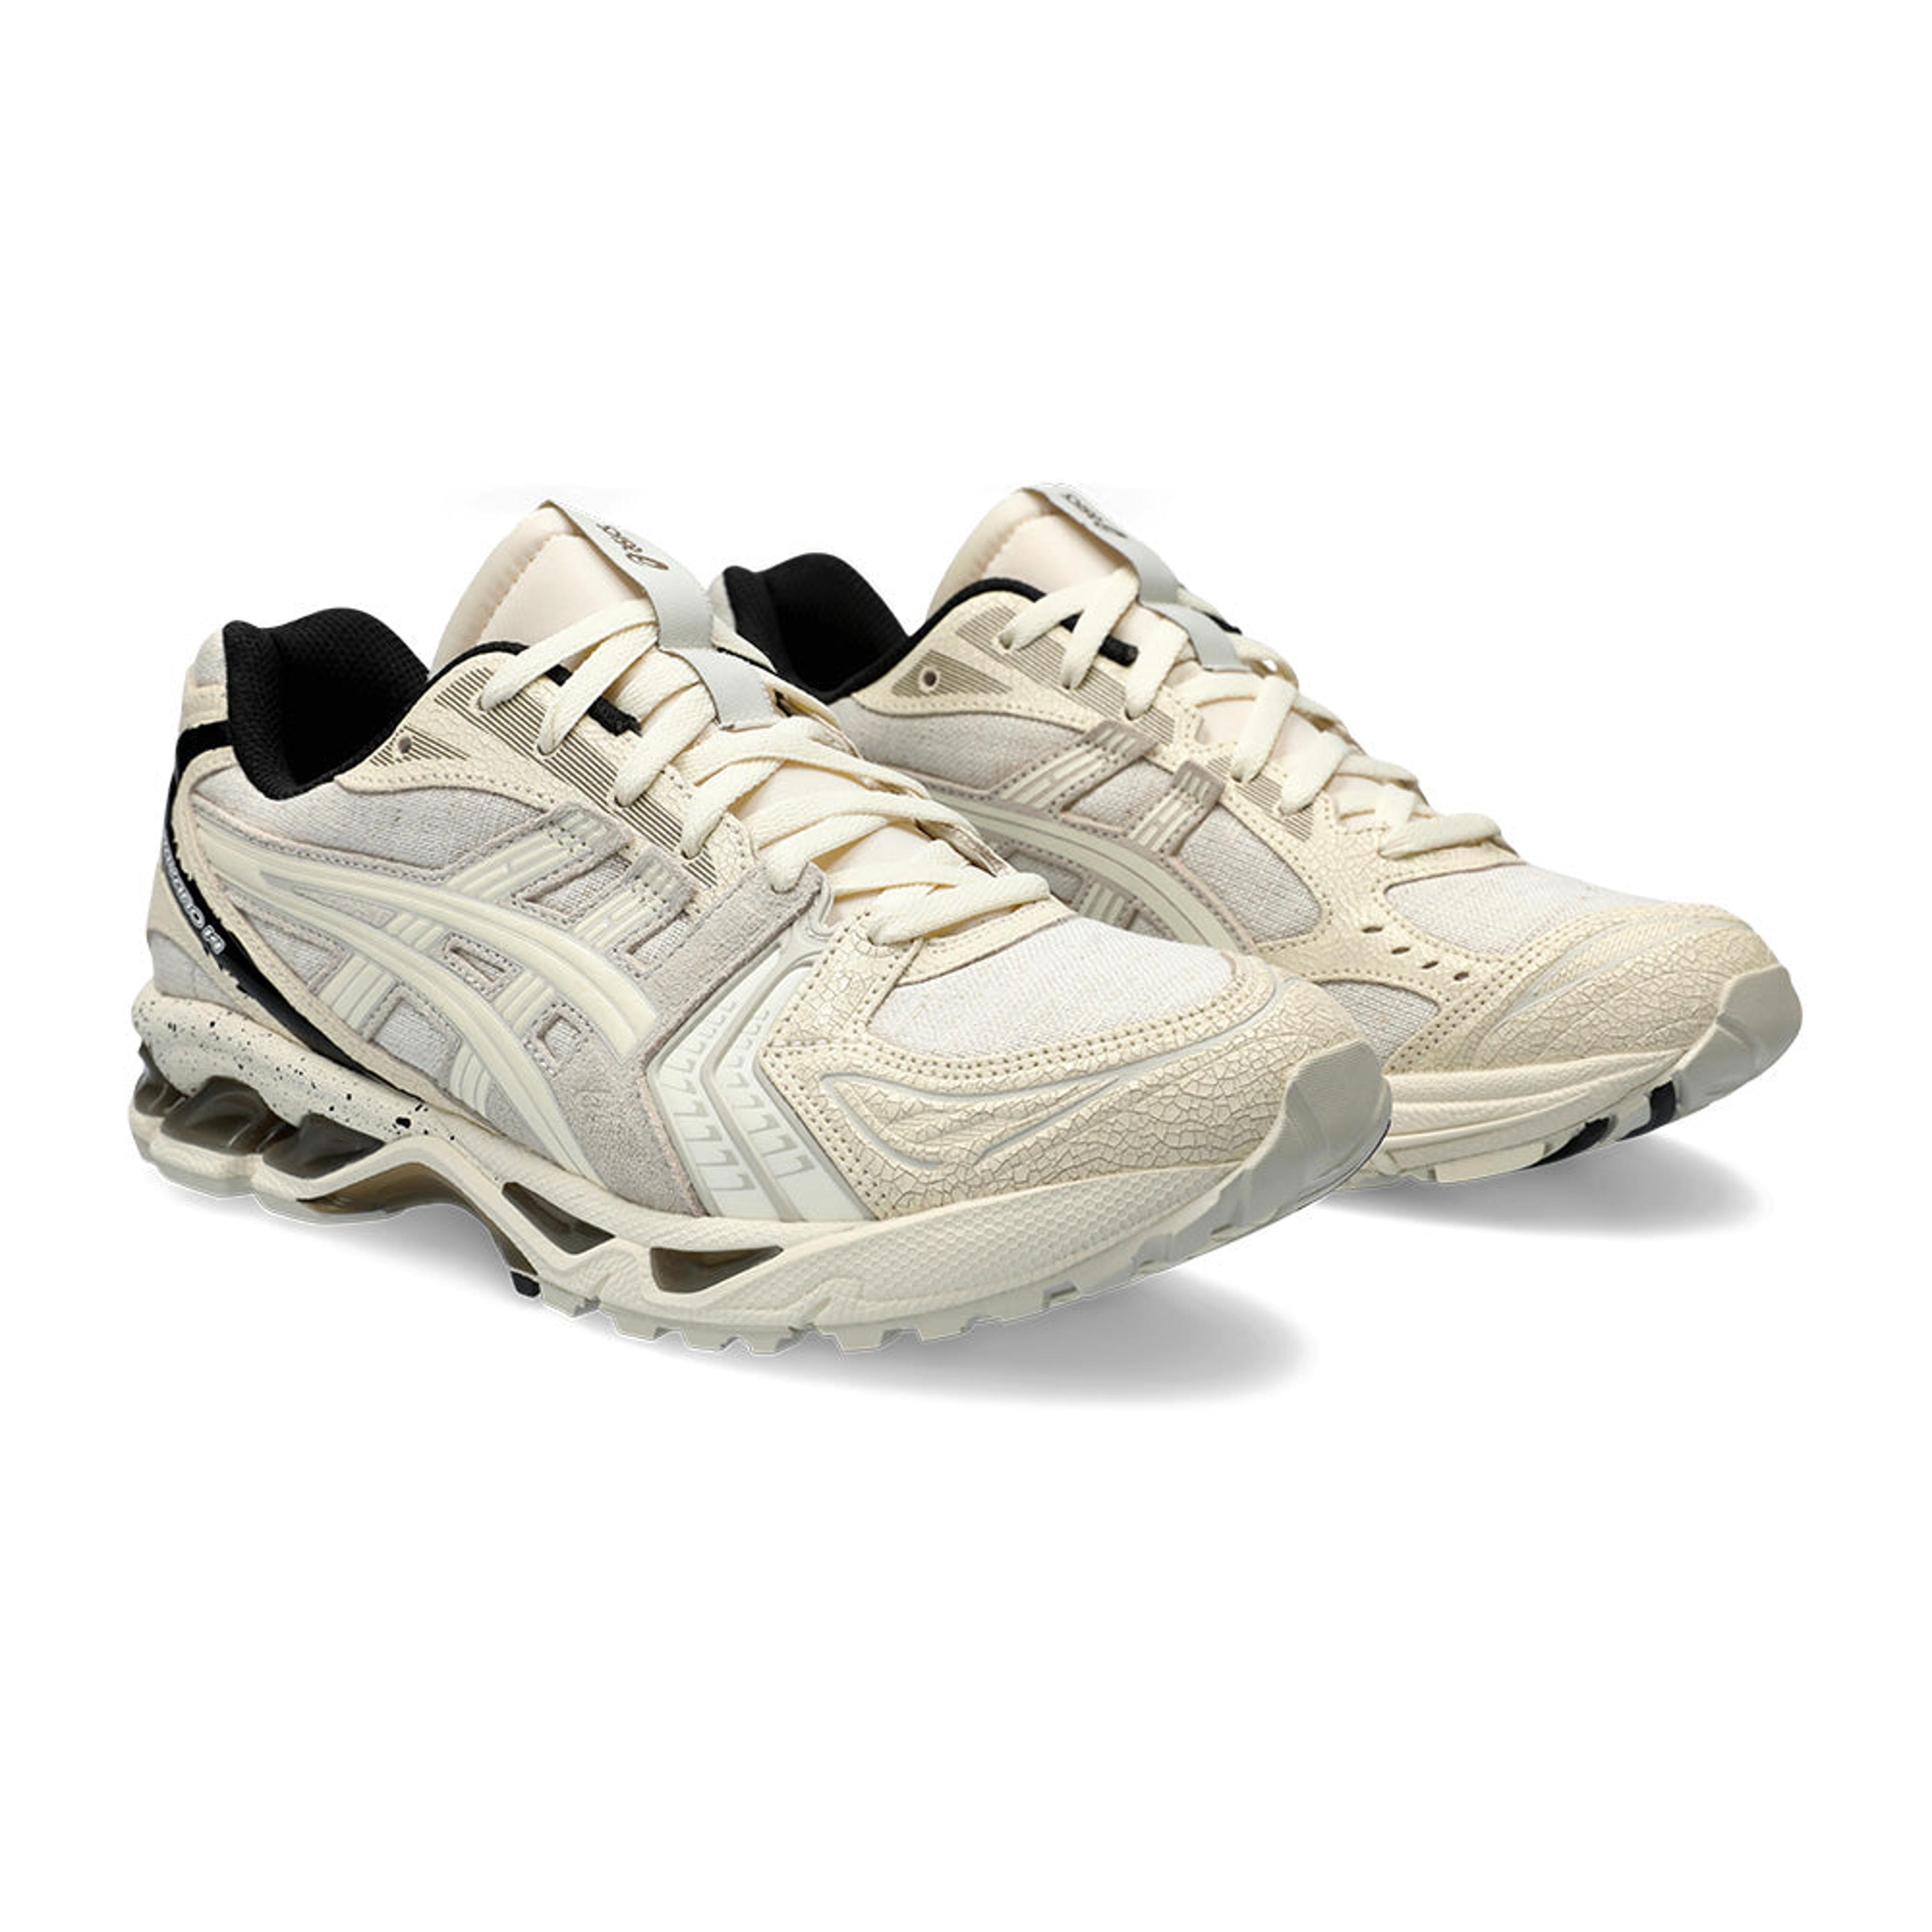 Alternate View 1 of Asics Gel-Kayano 14 "Imperfection" Pack